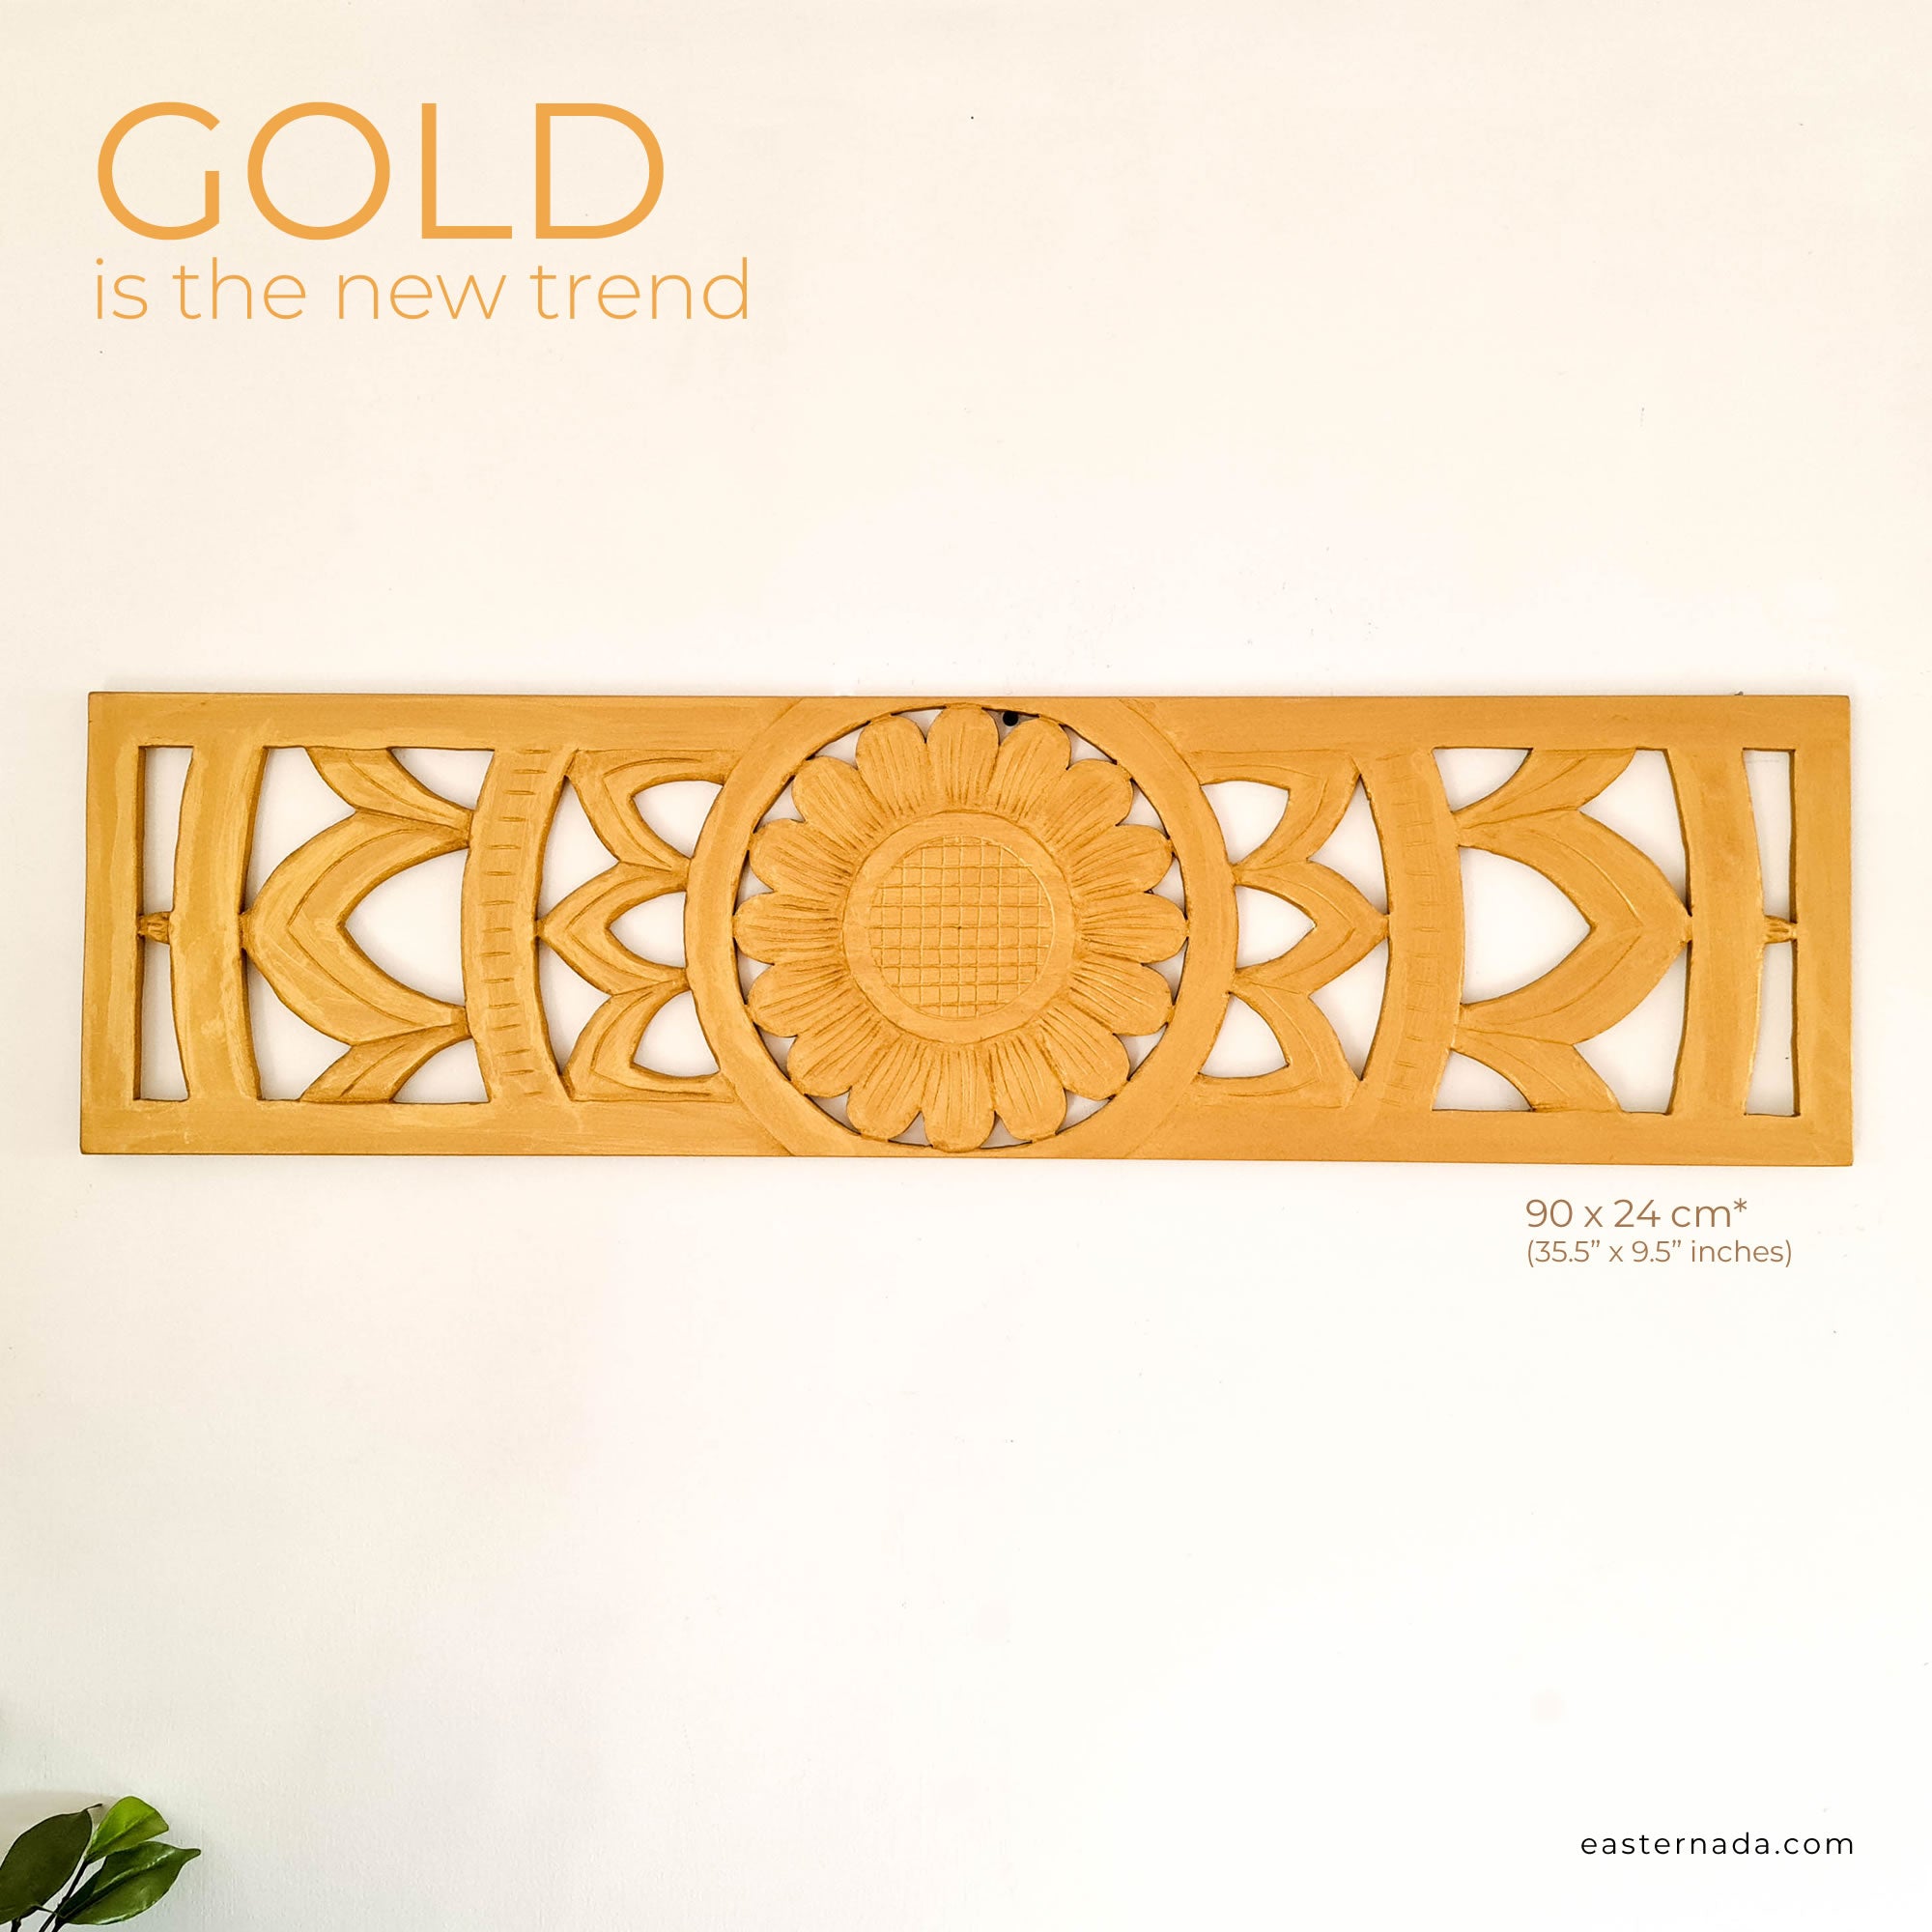 Carved Wooden Decorative Long Panel Art Sculpture Gold Mandala Headboard. Hand crafted by skilled craftsmen this piece is unique and simply amazing